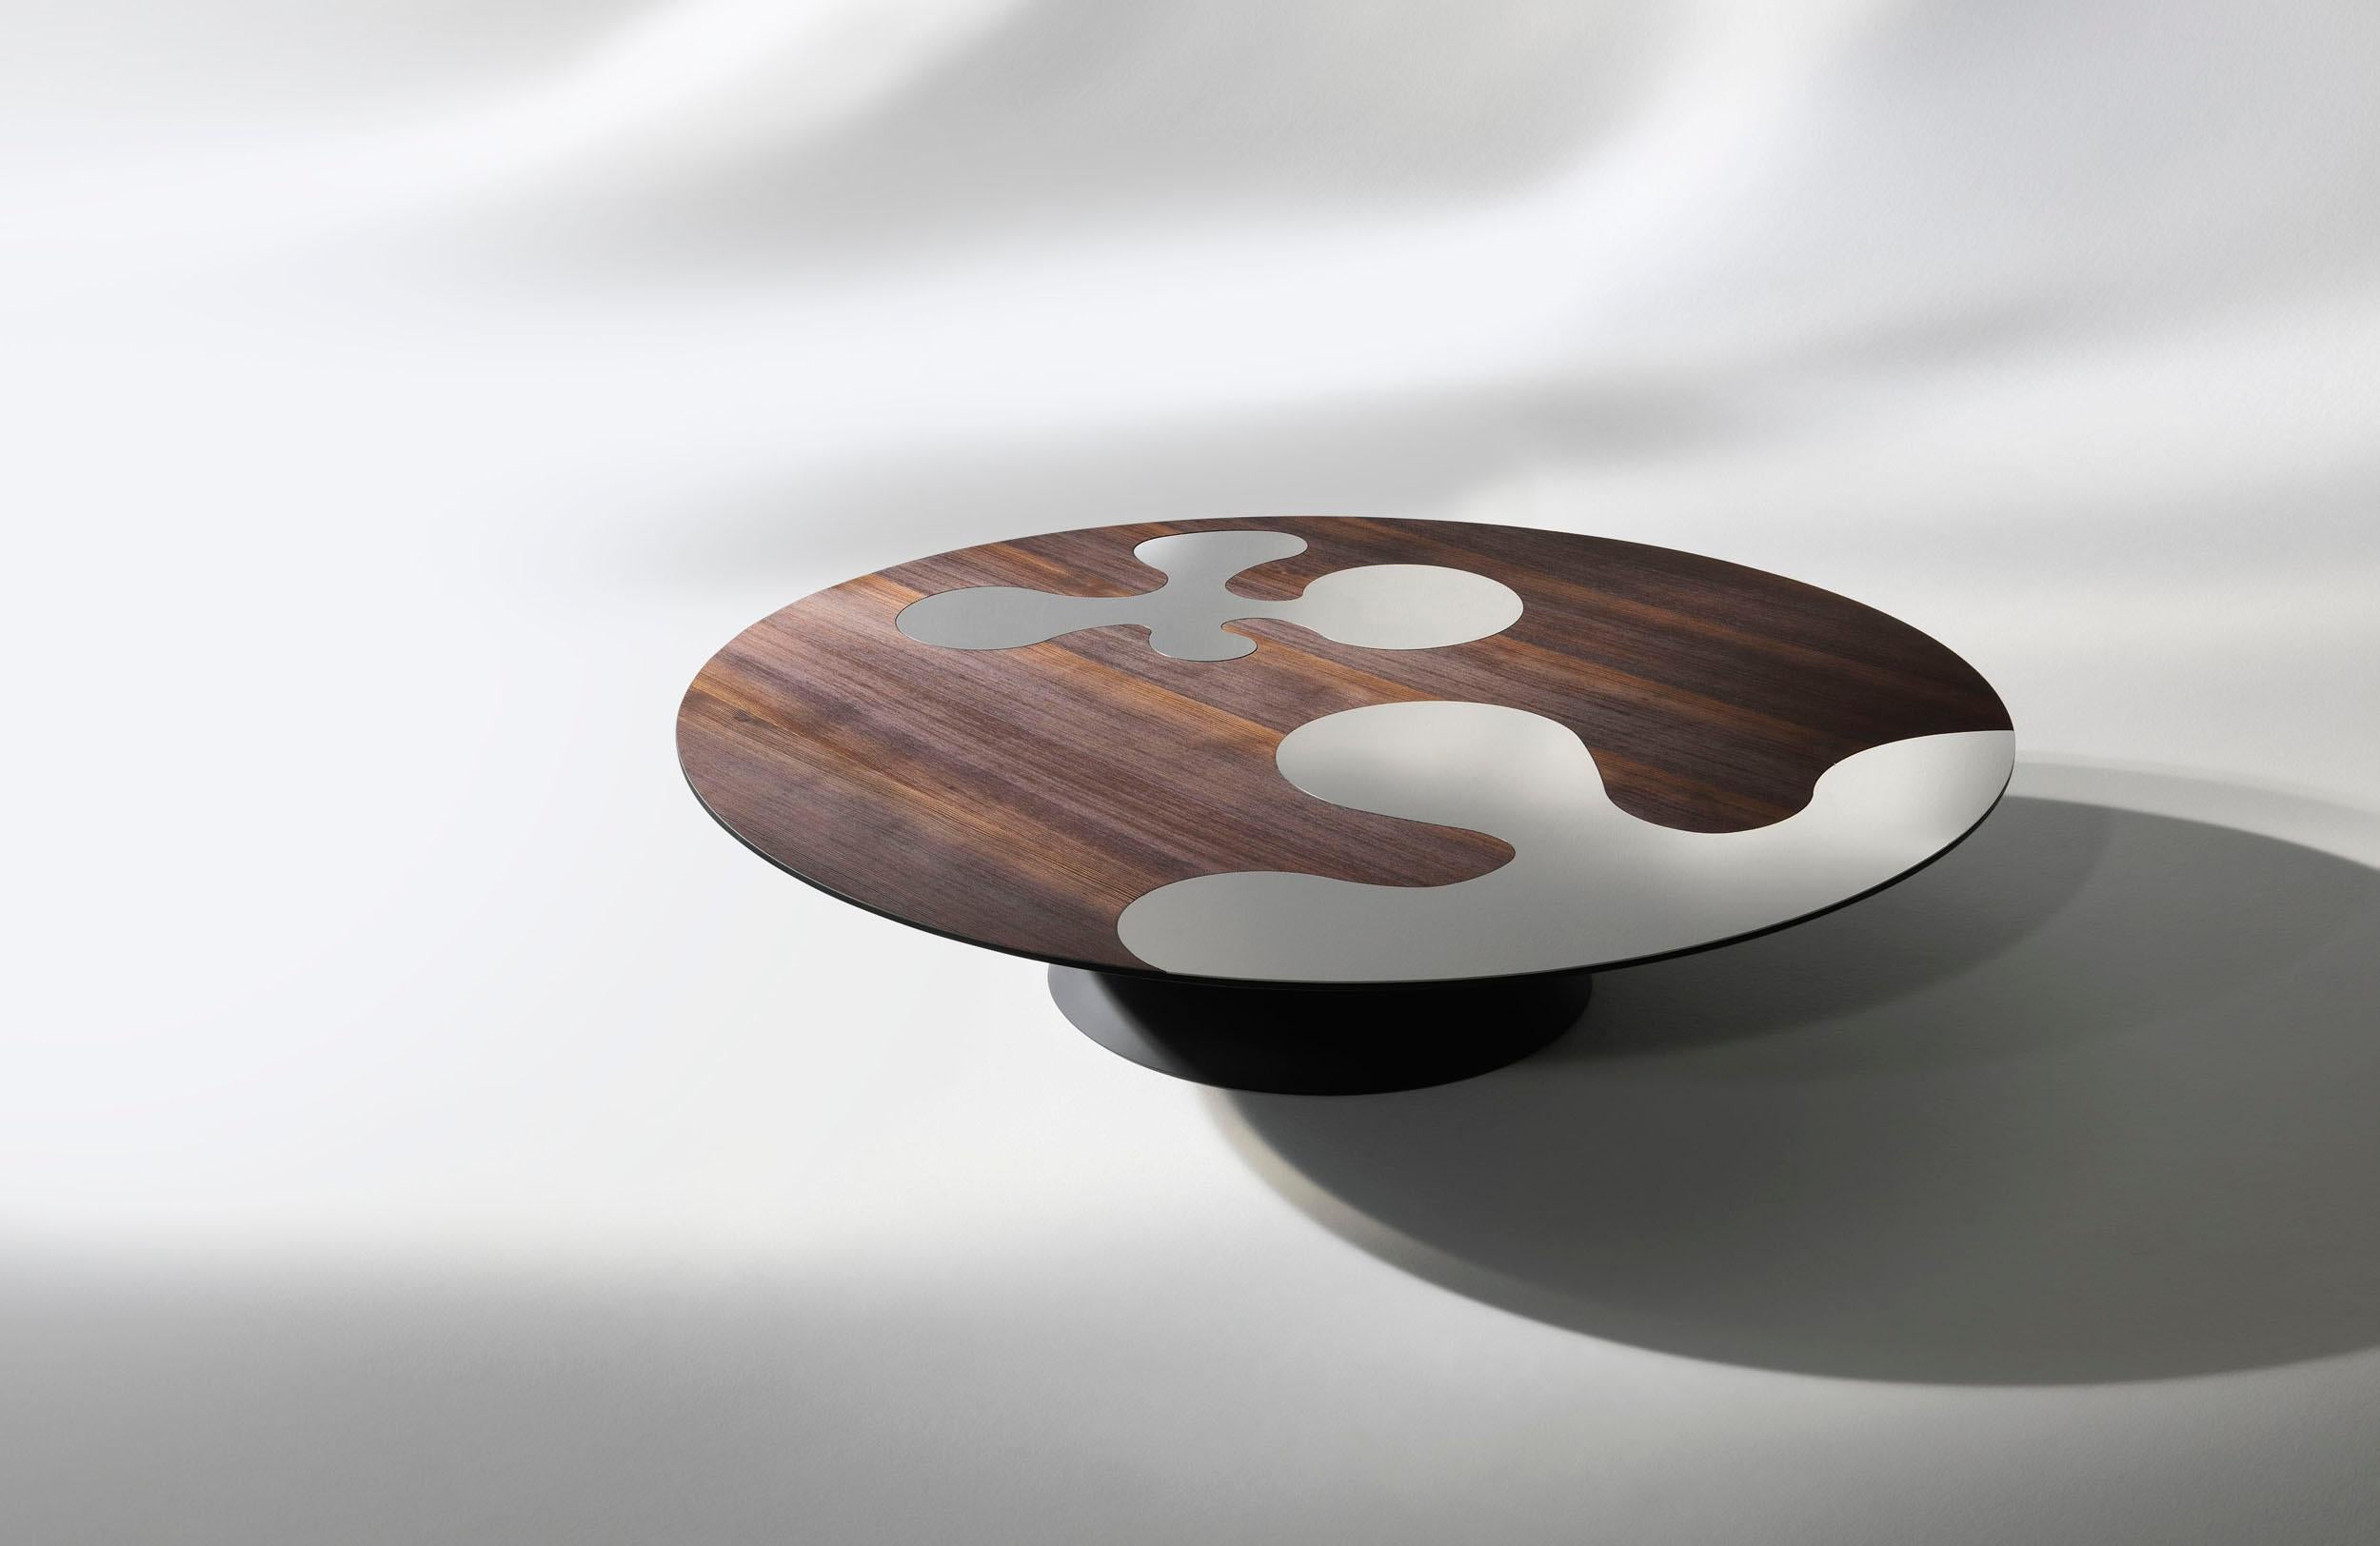 eries of coffee tables  inspired by the 
islands of the Venetian lagoon. Valuable the  
brushed heat-treated larch top workmanship  cookie color with inserts 
stainless in version 1. steel inserts in version 1 is worthwhile.
Islands 2: top and base